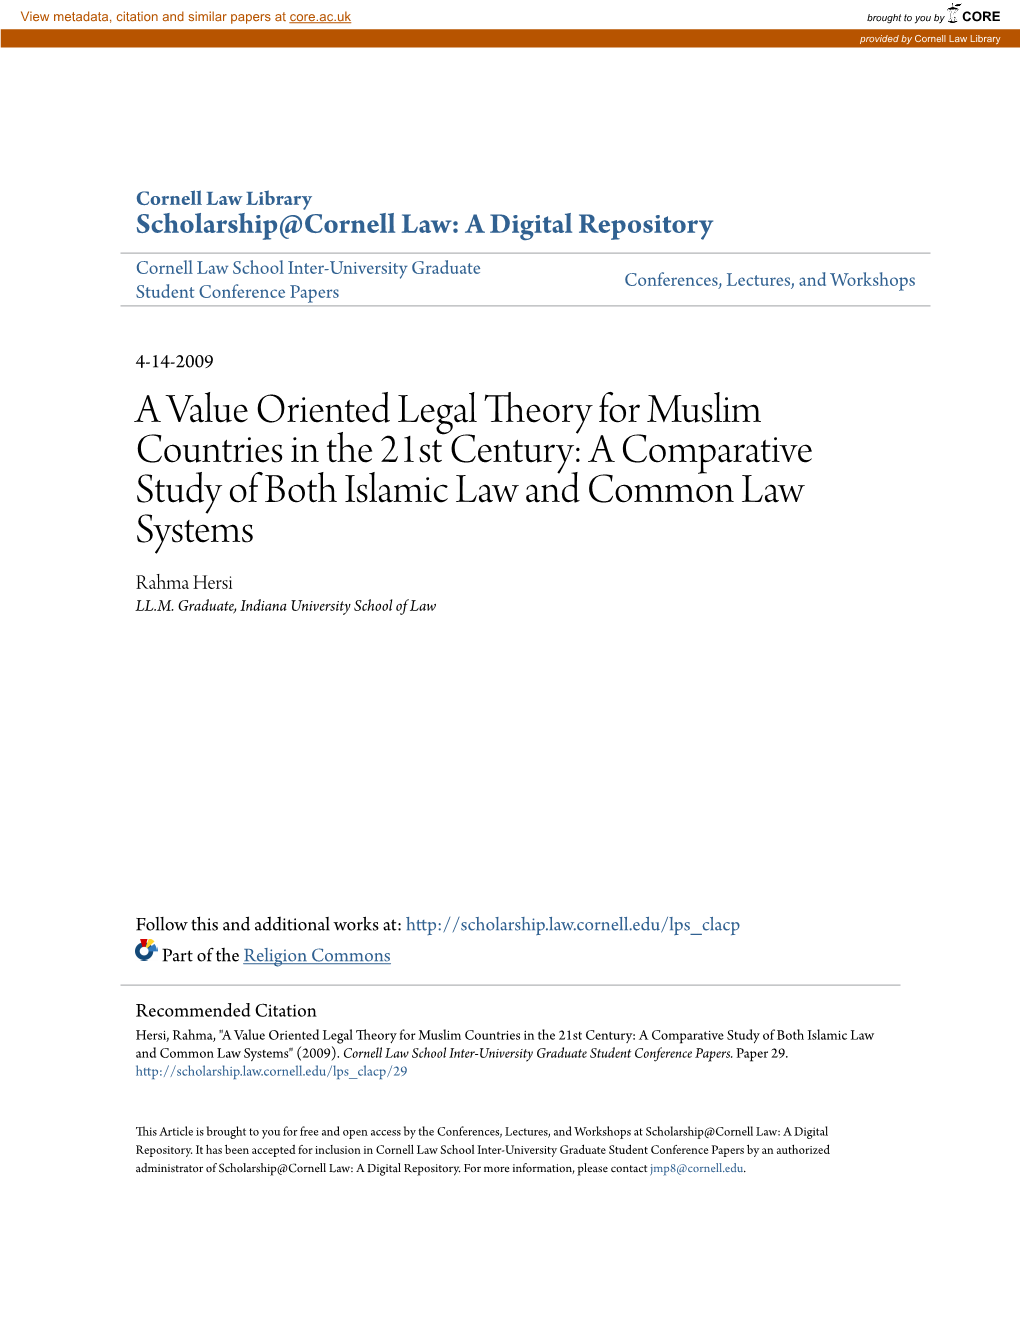 A Comparative Study of Both Islamic Law and Common Law Systems Rahma Hersi LL.M